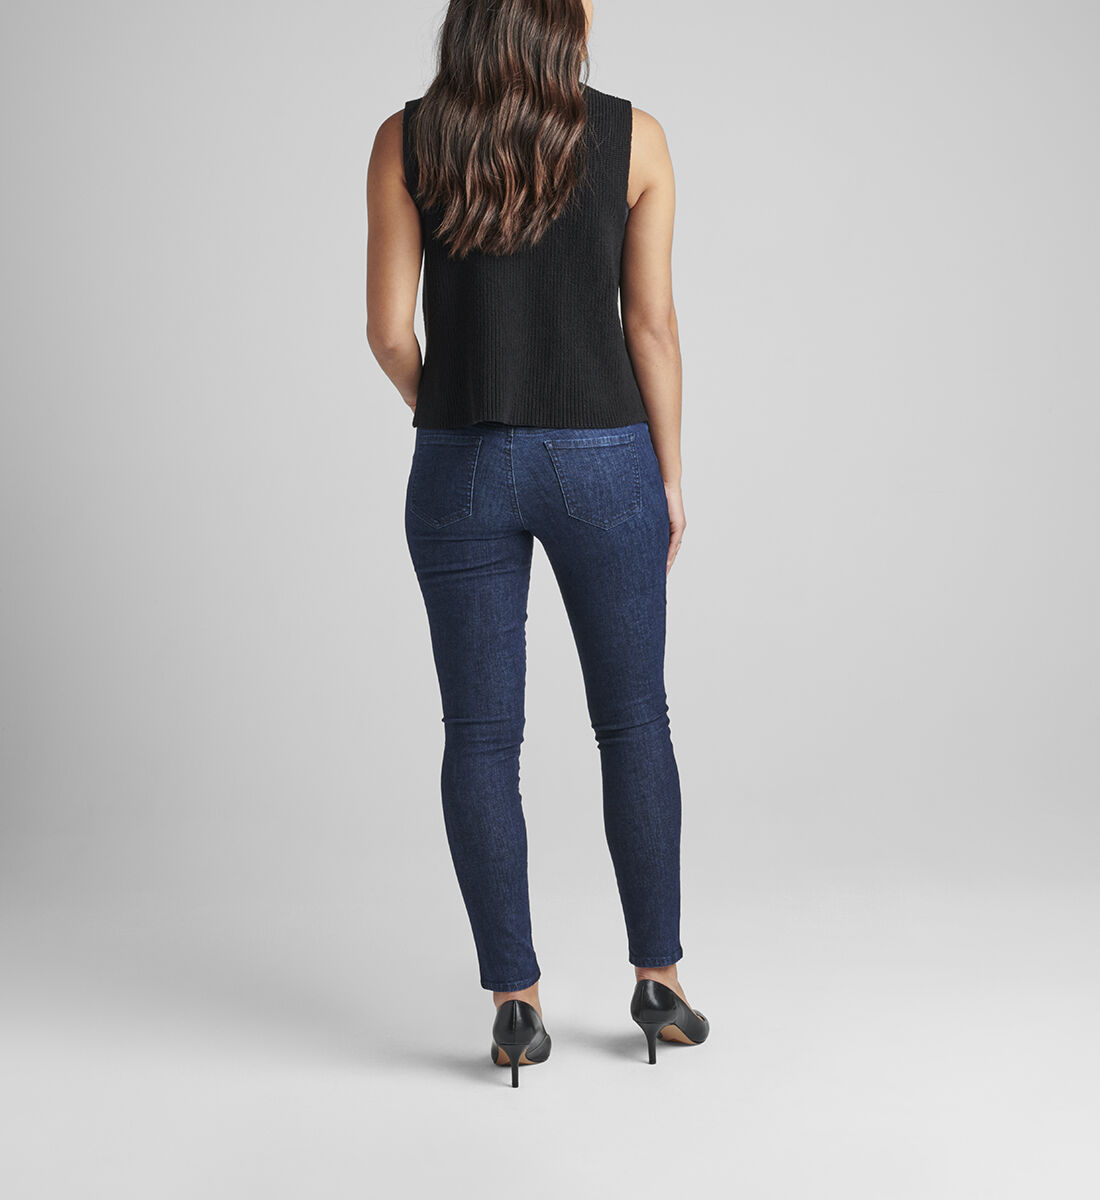 Nora Mid Rise Skinny Pull-On Jeans Petite Back